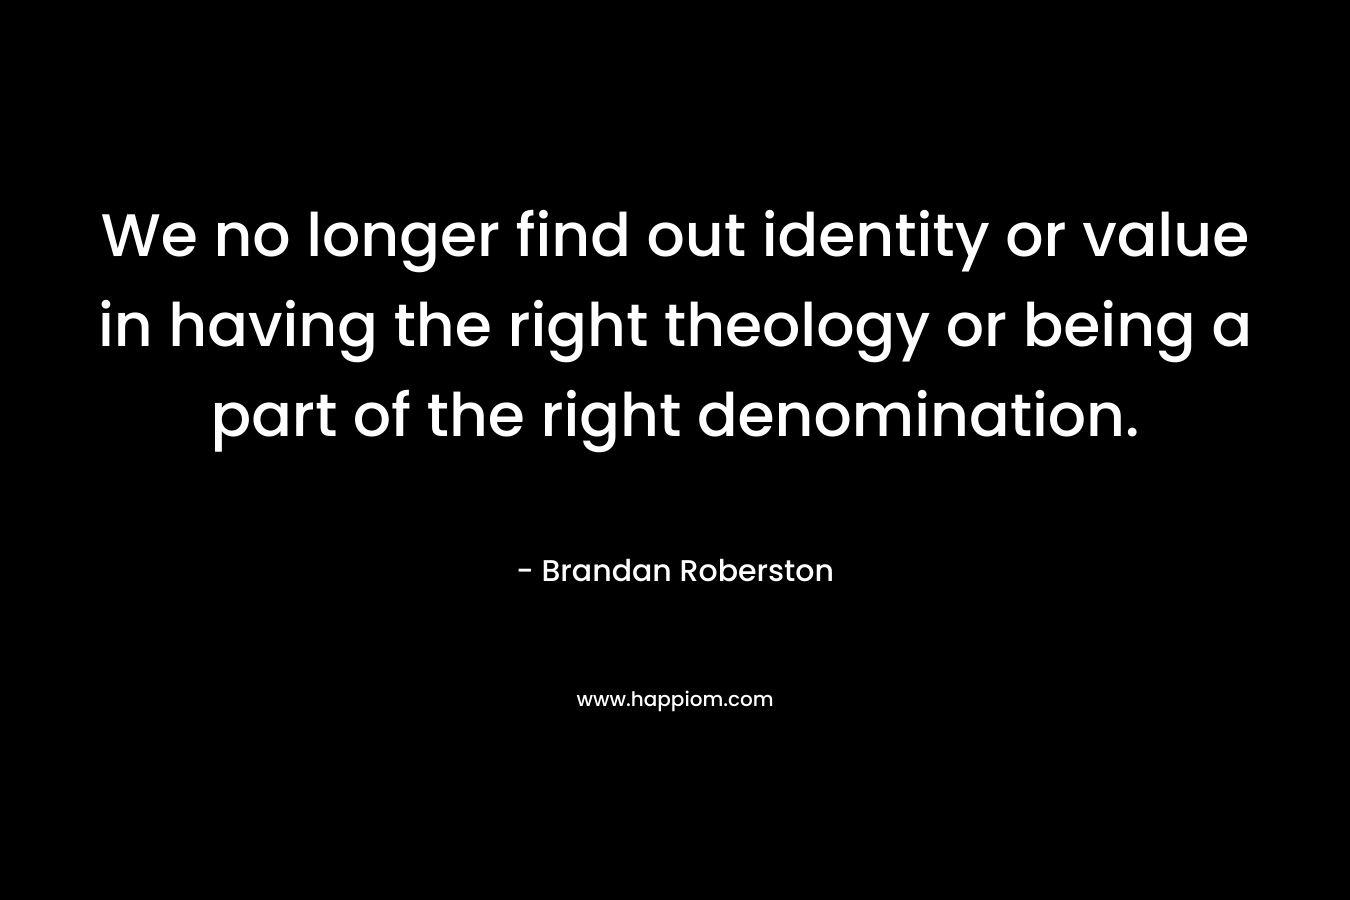 We no longer find out identity or value in having the right theology or being a part of the right denomination. – Brandan Roberston